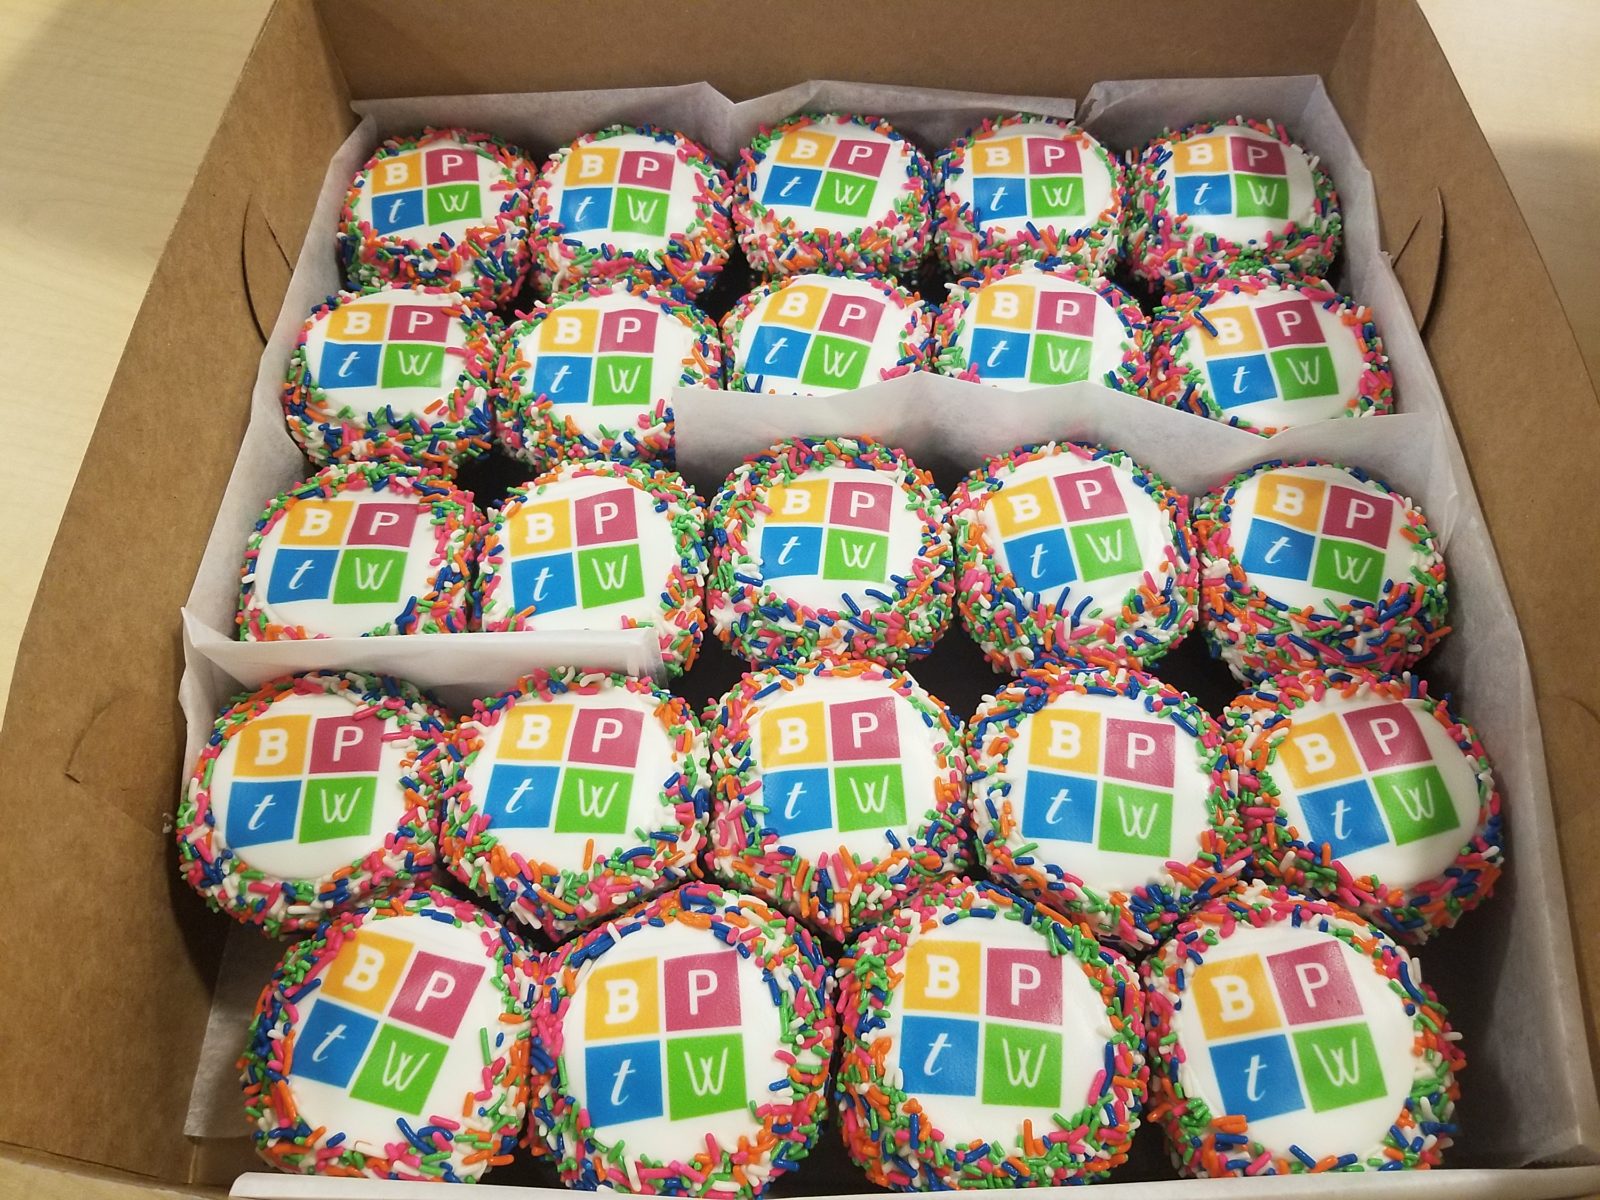 Custom cupcakes with the Best Places to Work logo (BPTW) and colorful sprinkles on edges of cupcakes.